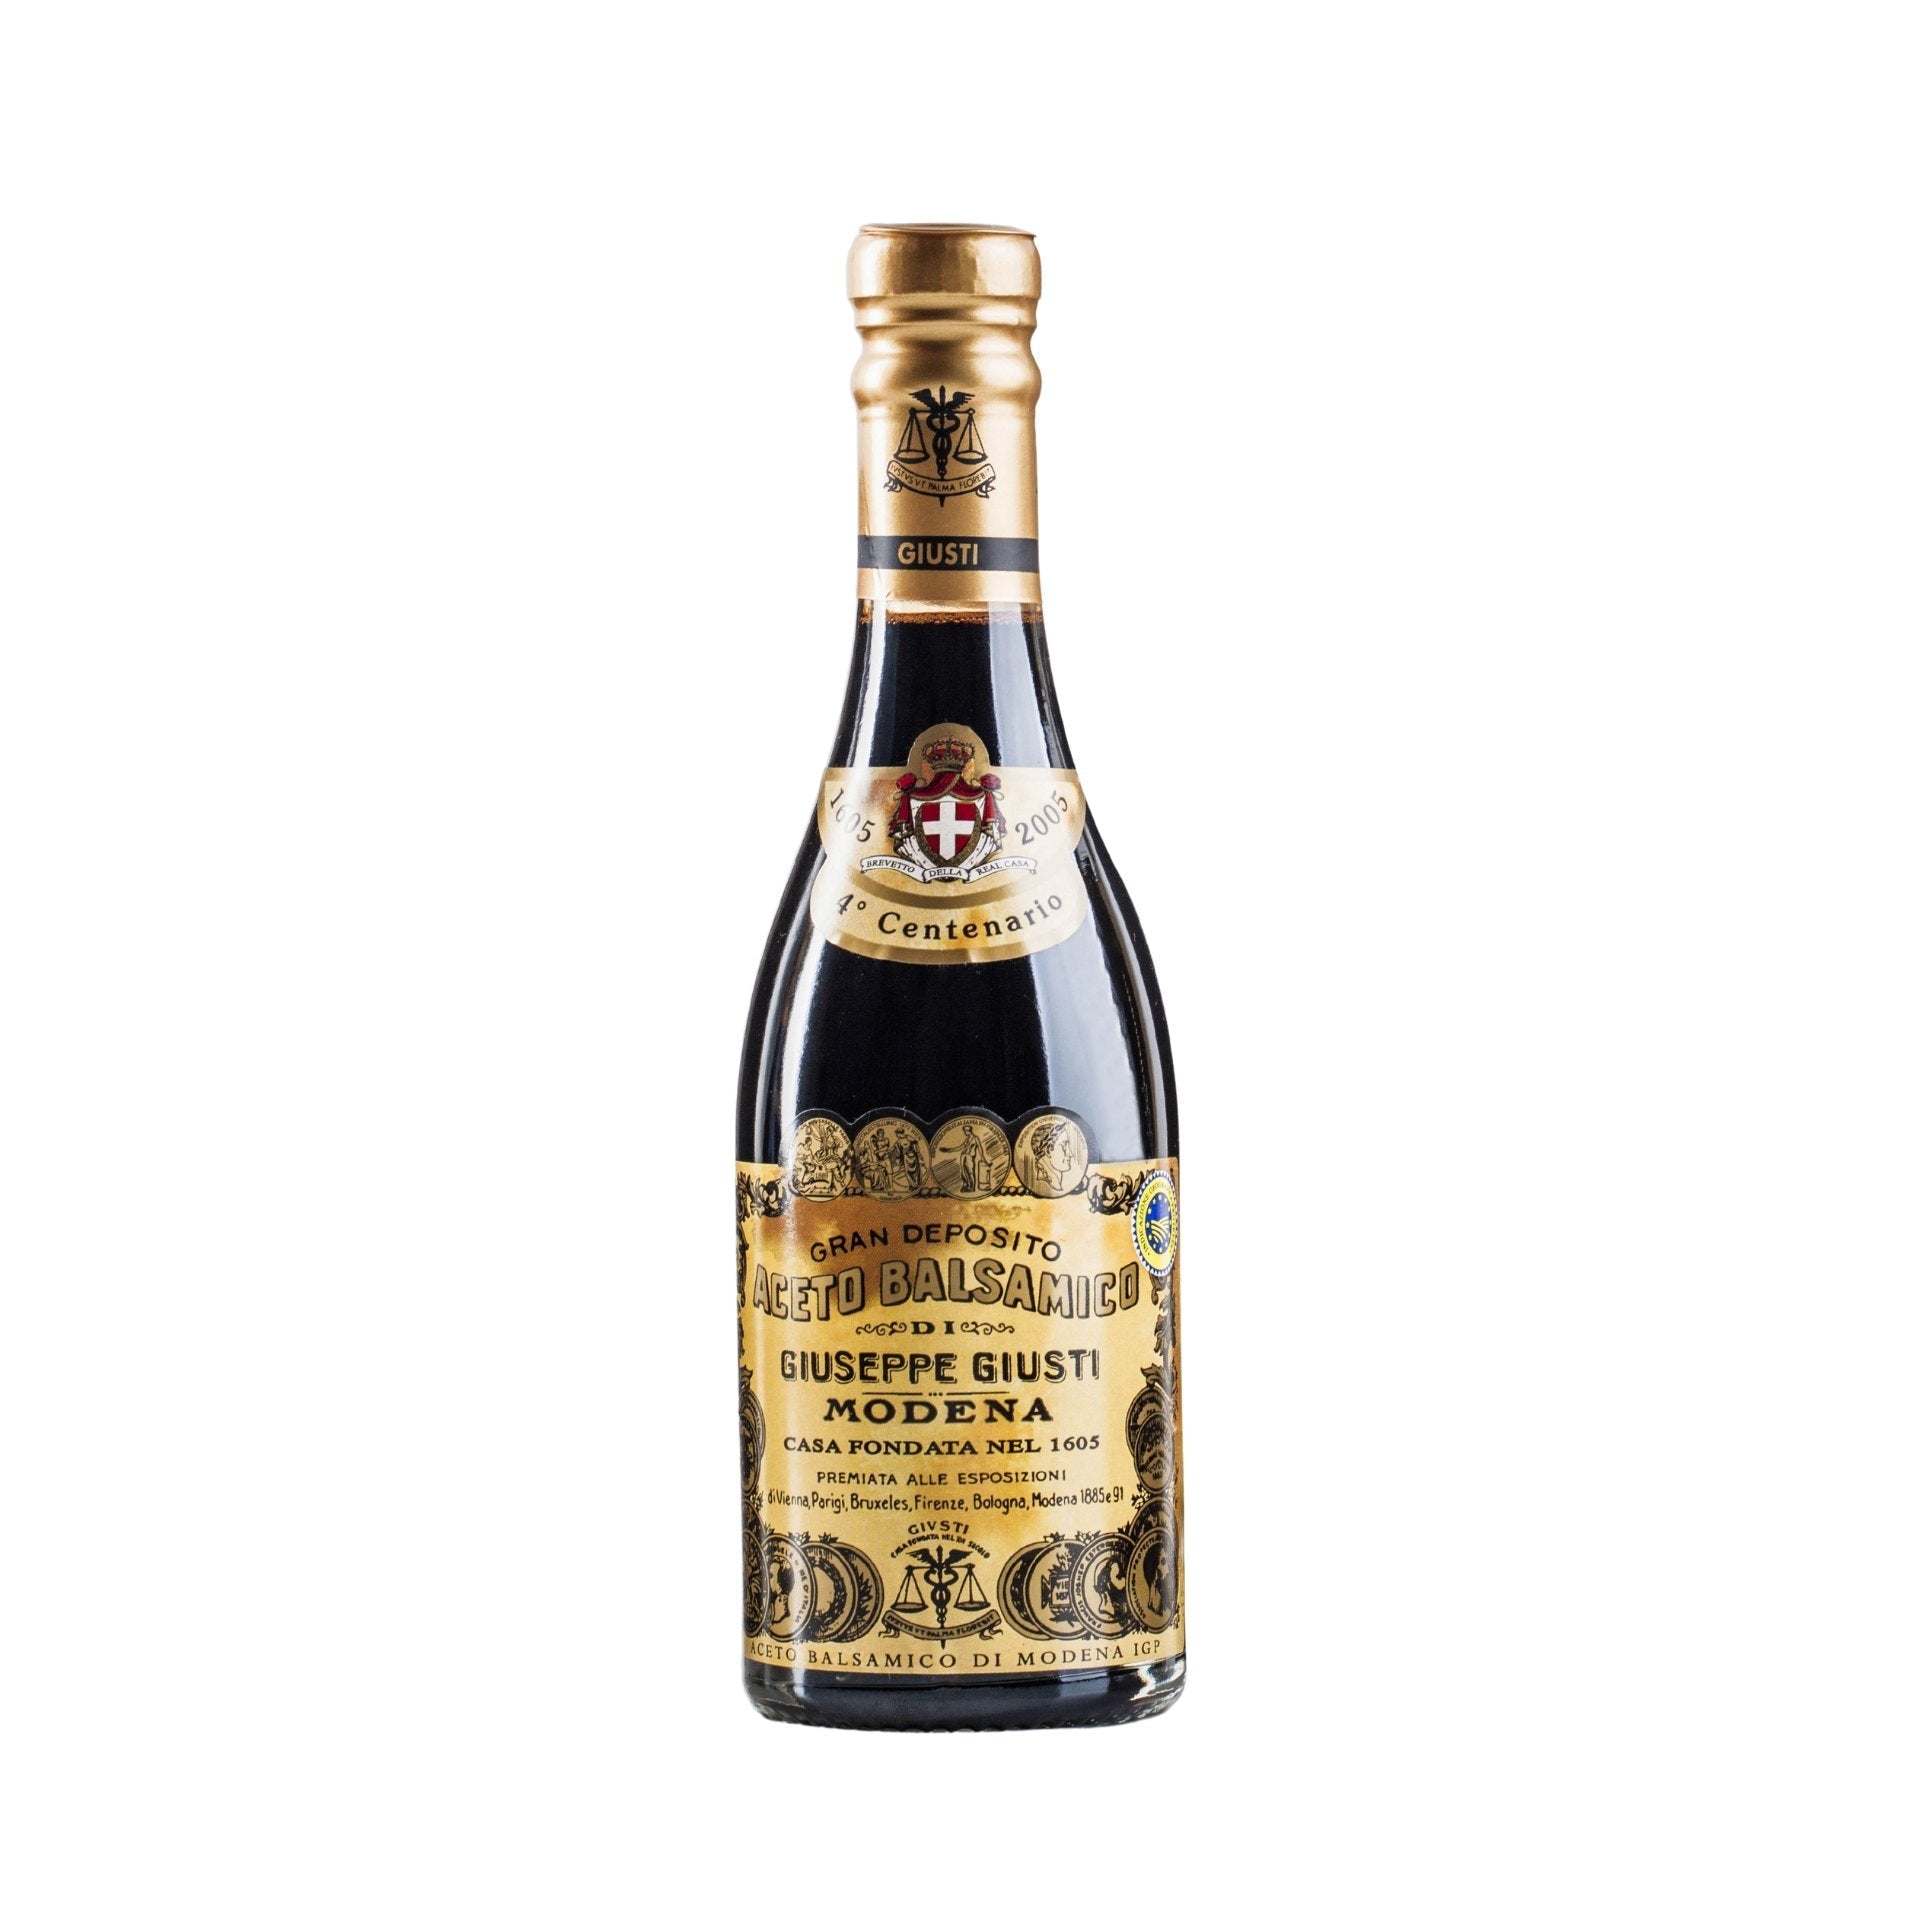 Acetaia Giusti 4 Gold Medals 'Quarto Centenario' Champagnotta 250ml (15 years) Balsamic Vinegar of Modena IGP  | Imported and distributed in the UK by Just Gourmet Foods